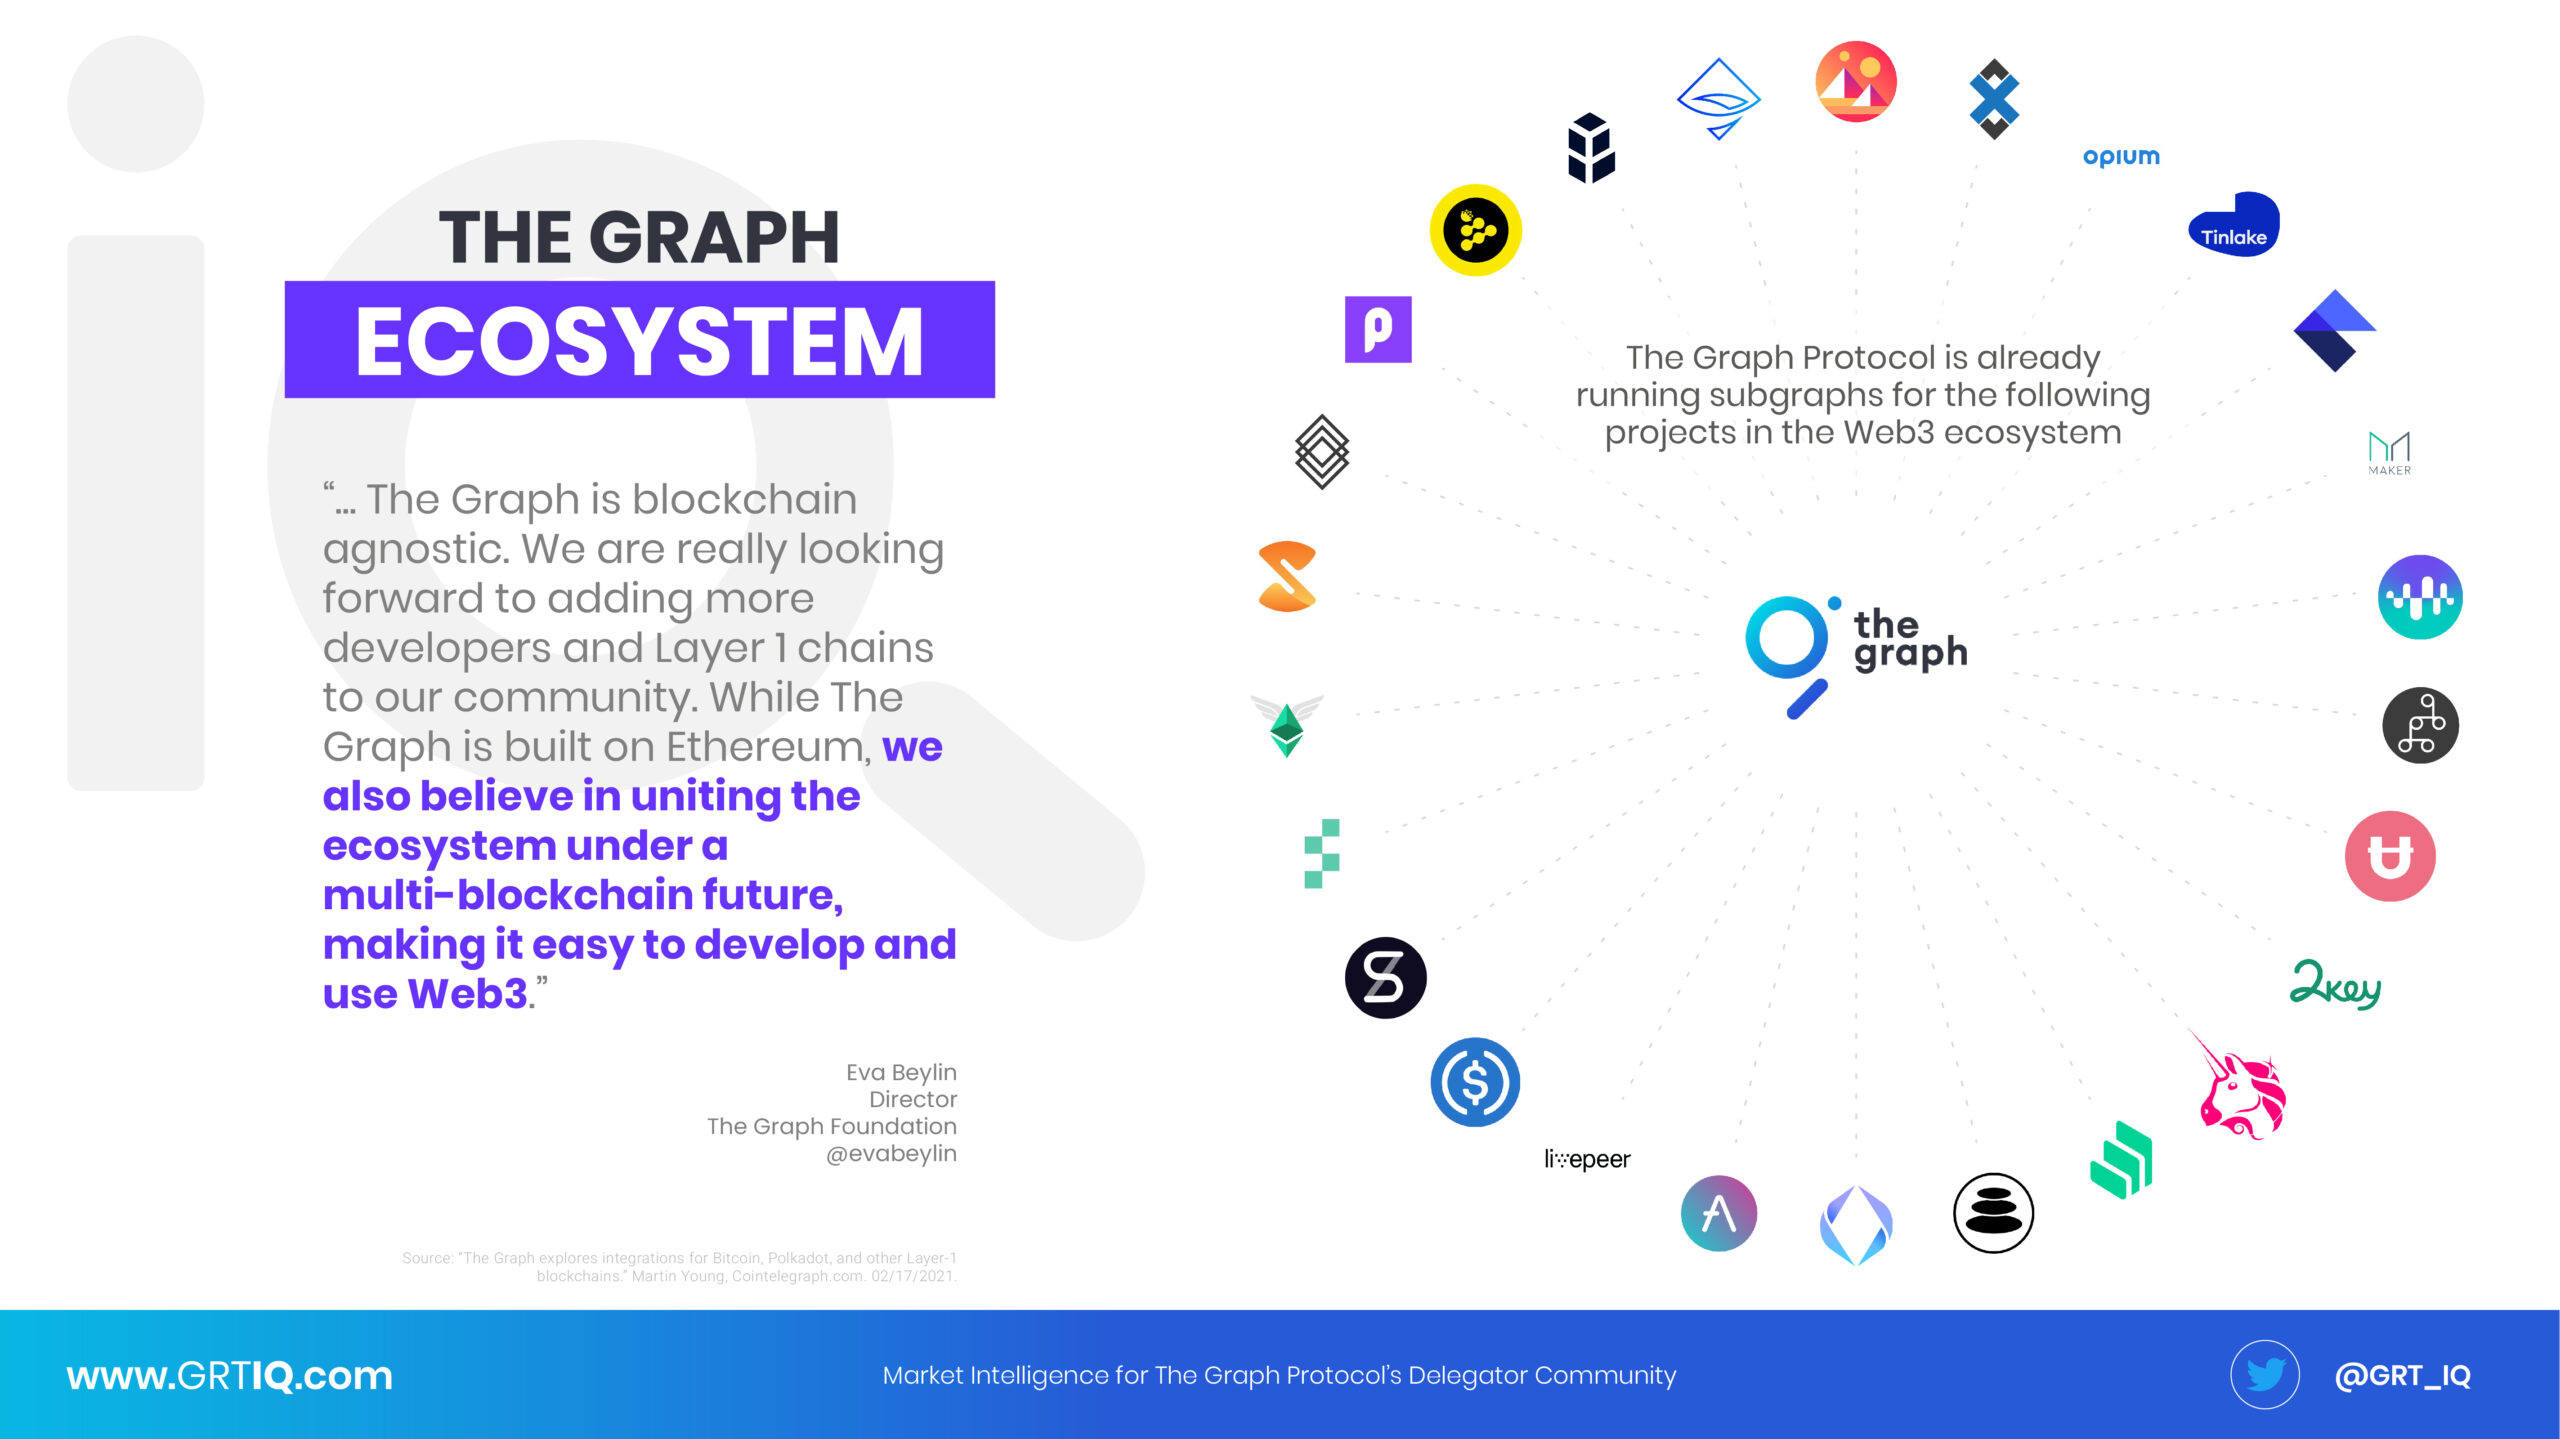 An illustration of The Graph Protocol’s ecosystem and the partners who utilize their indexing and querying services.